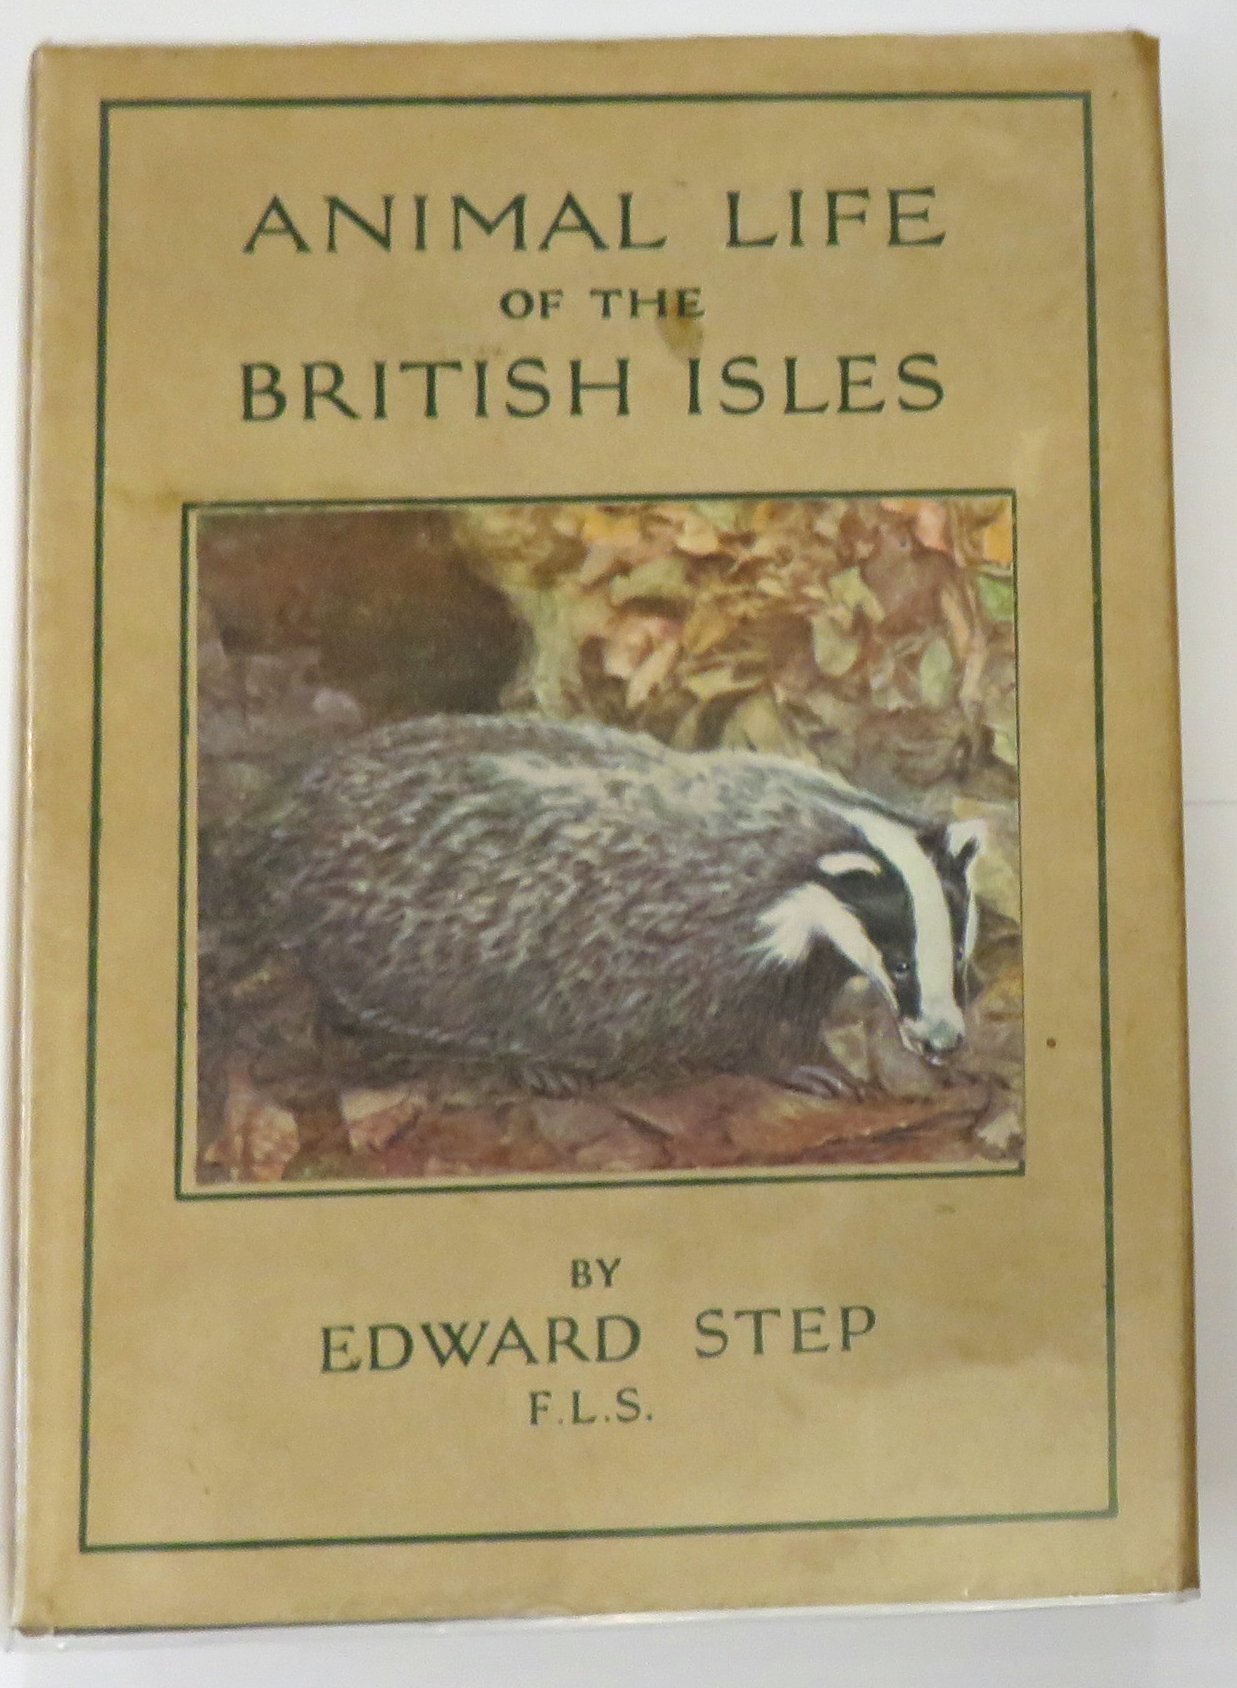 The Wayside And Woodland Series Animal Life Of The British Isles 